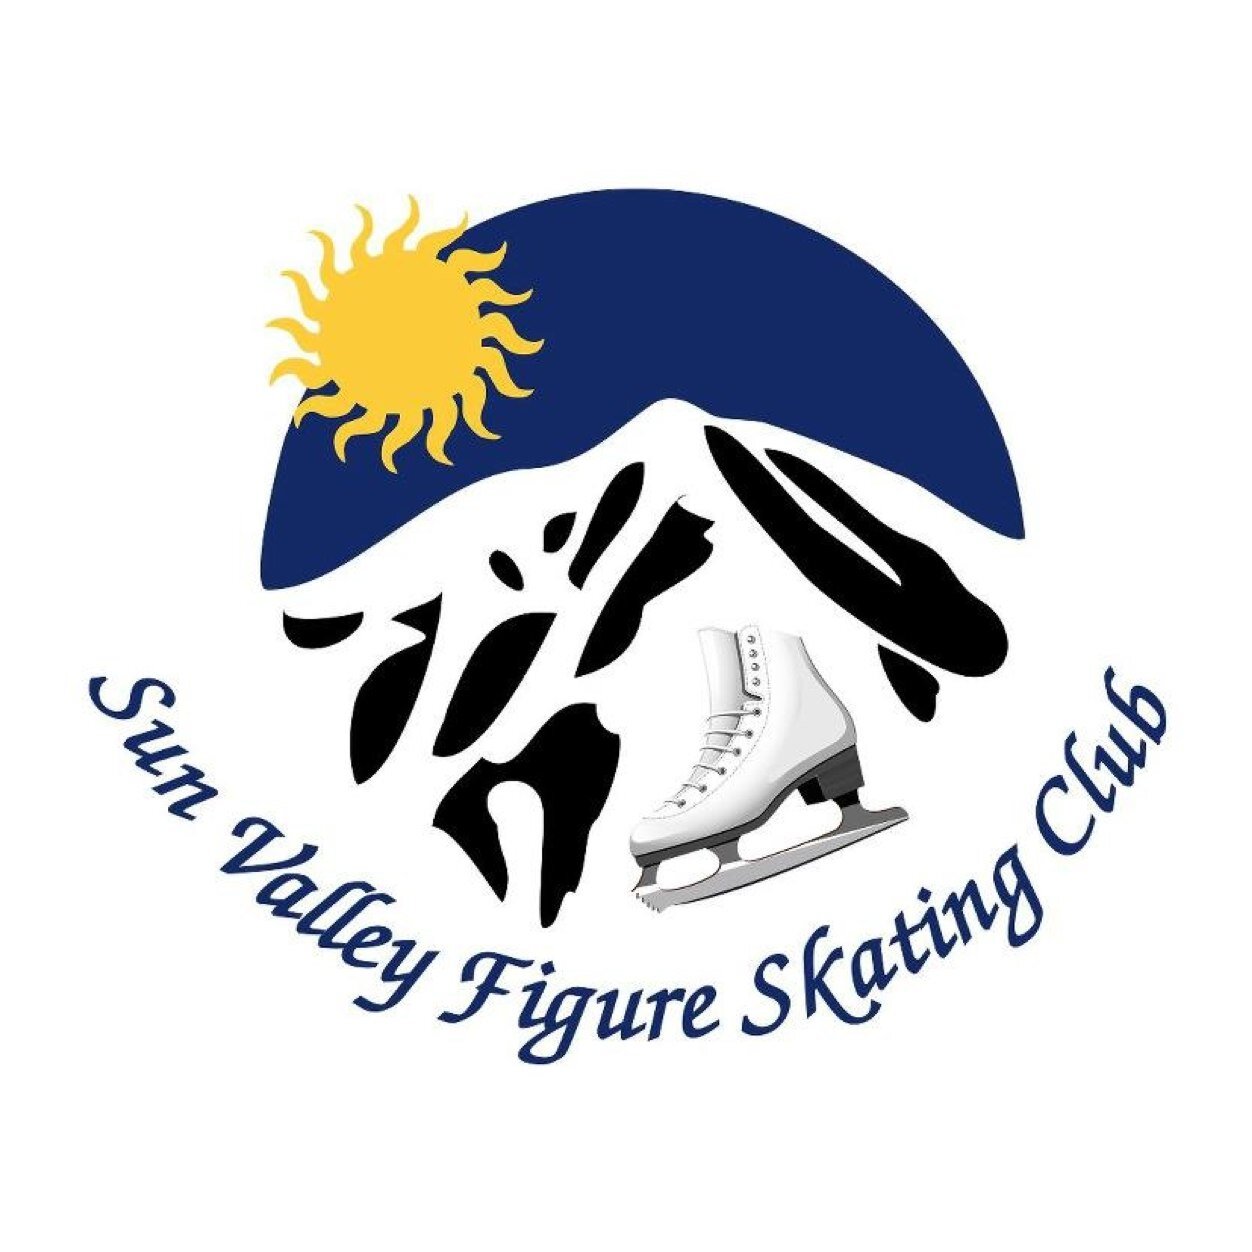 The Sun Valley Figure Skating Club is a non-profit figure skating club located in Sun Valley, Idaho.